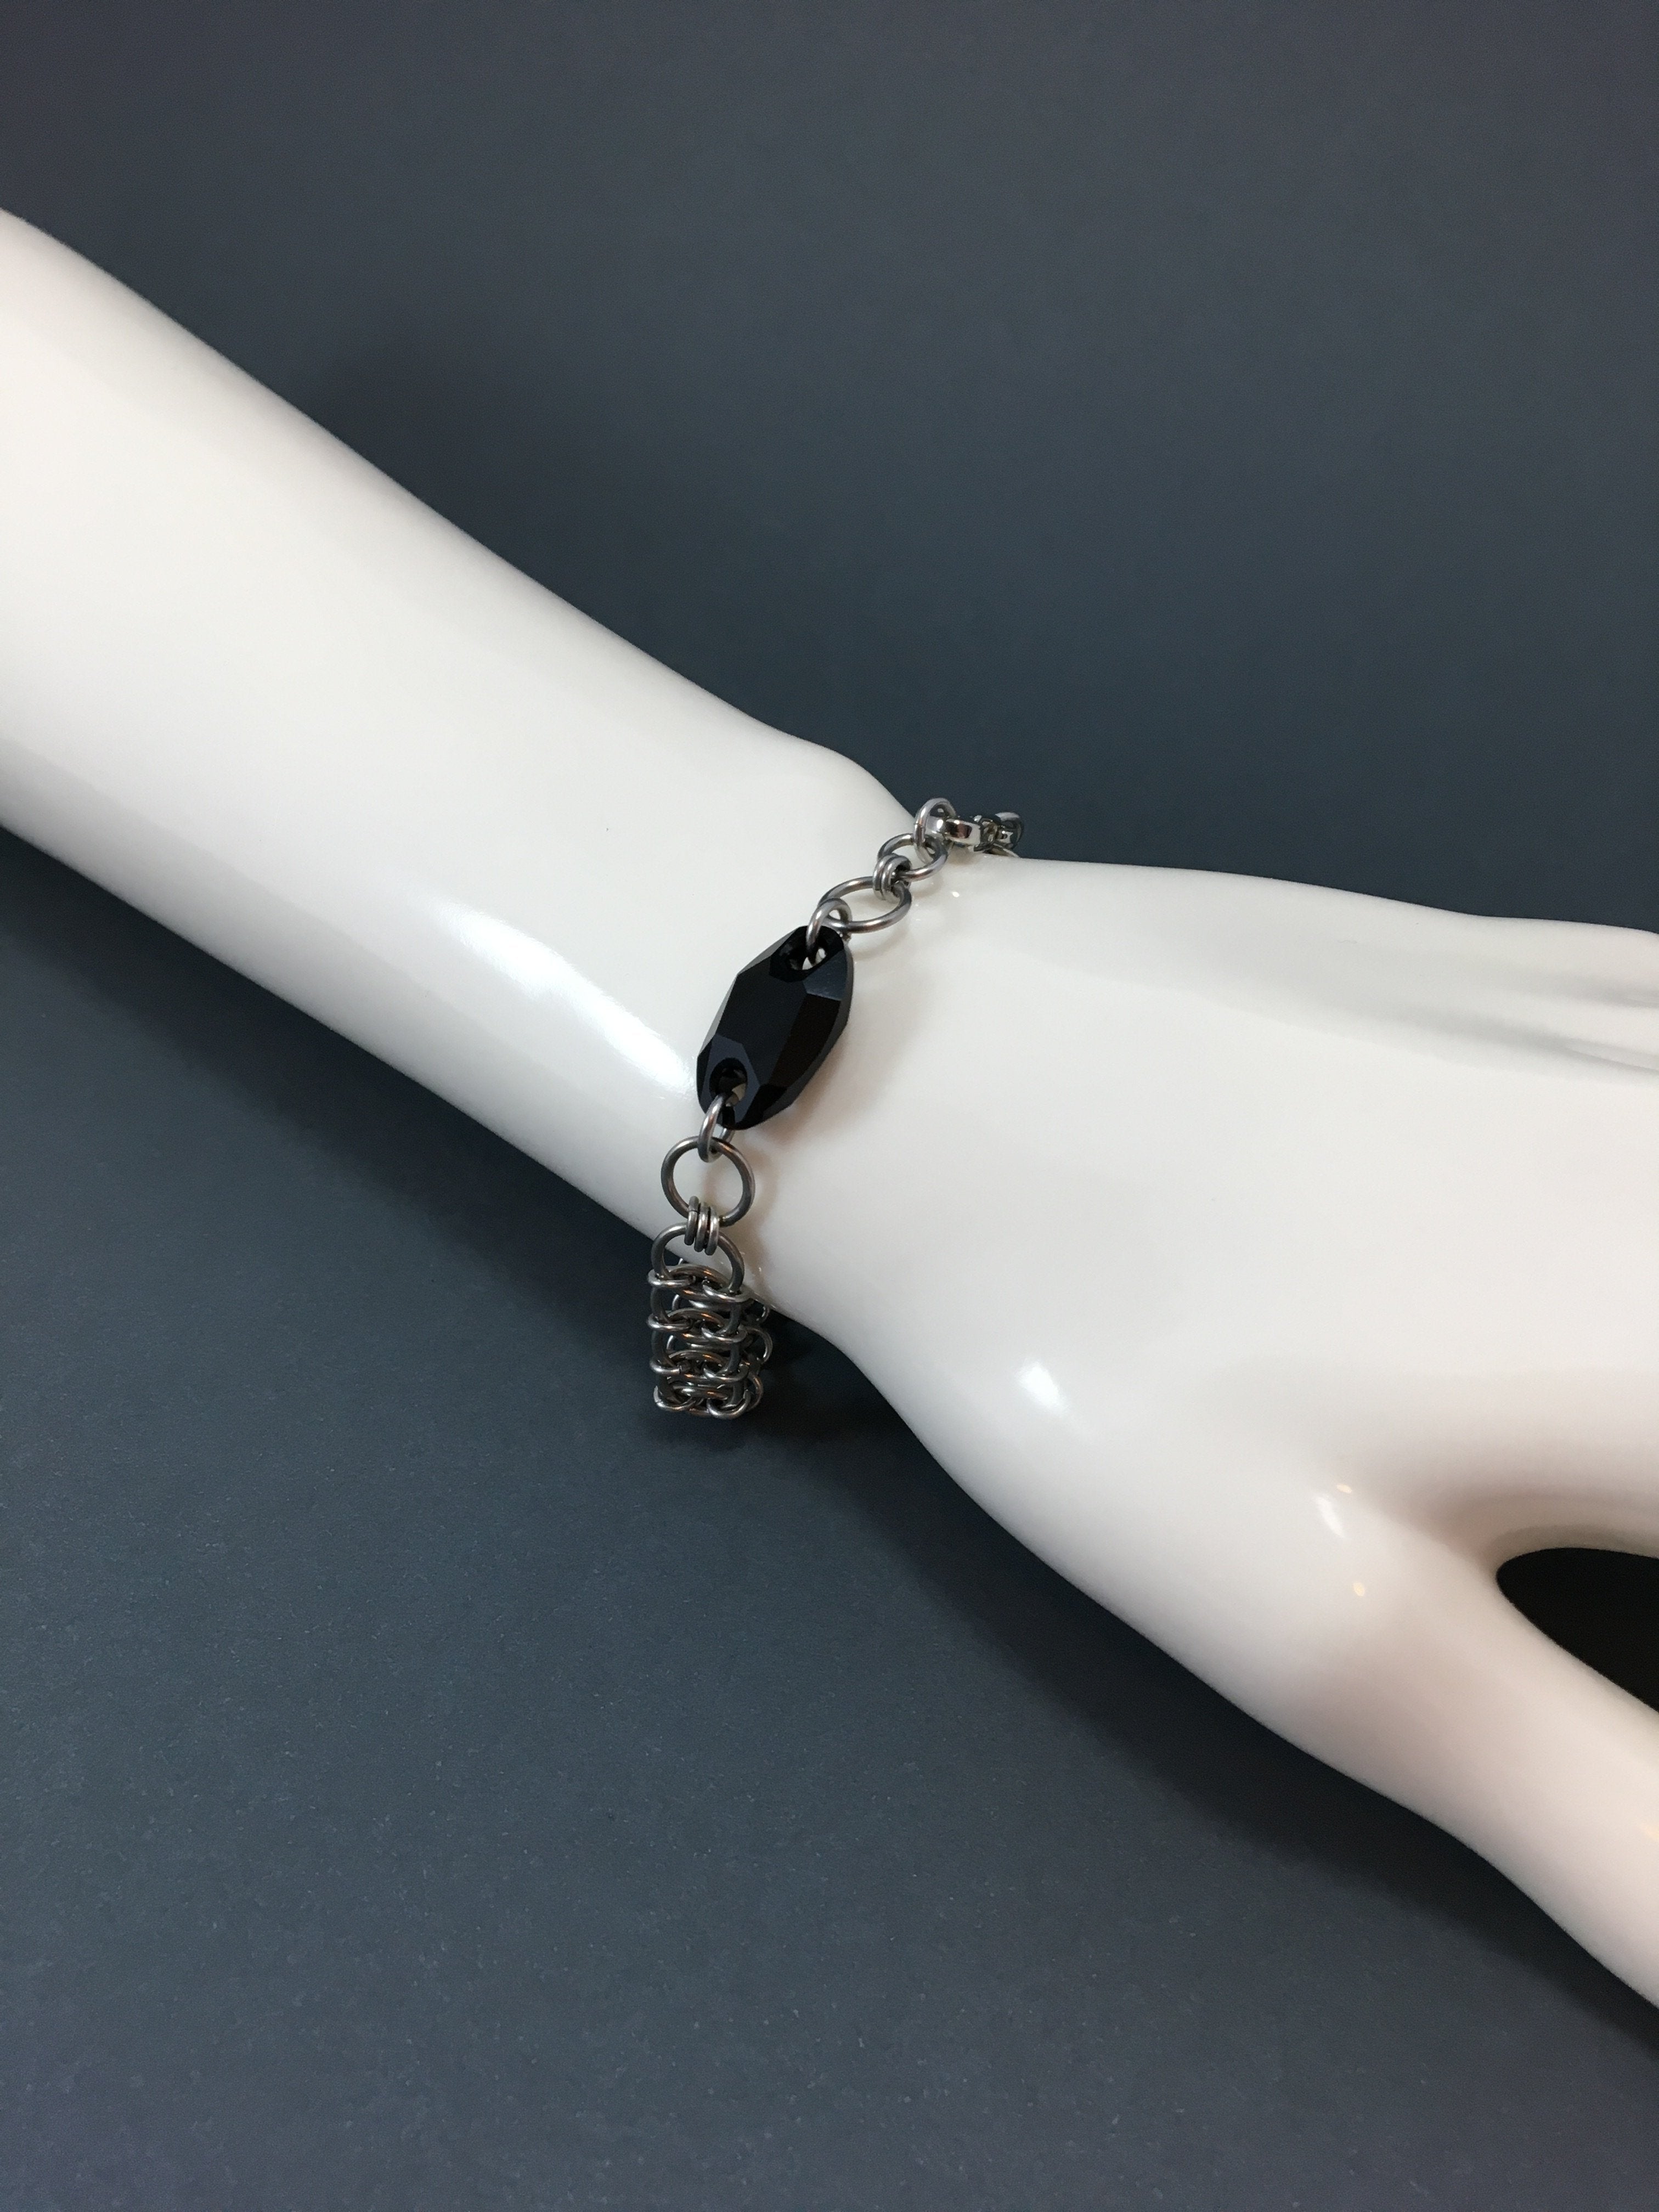 Swarovski Crystal Linked Chain Bracelet with Swarovski Crystal and Cubic  Zirconia Gemini Designer Jewellery Necklaces, Earrings, Bracelets and  Hairpieces